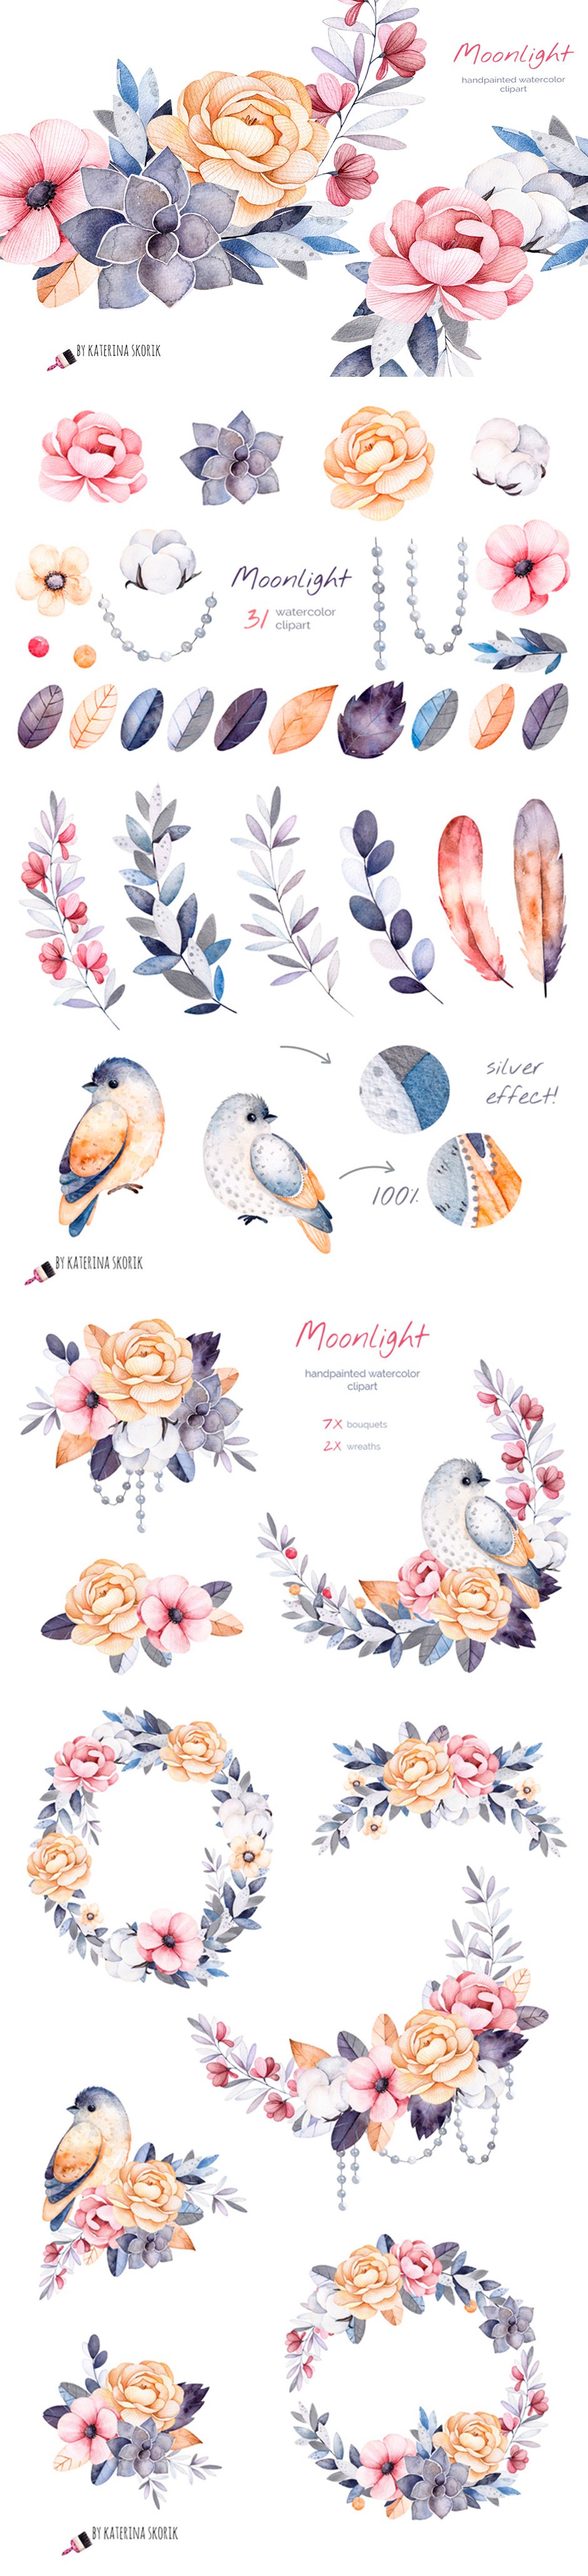 Moonlight: Handpainted Watercolor Collection